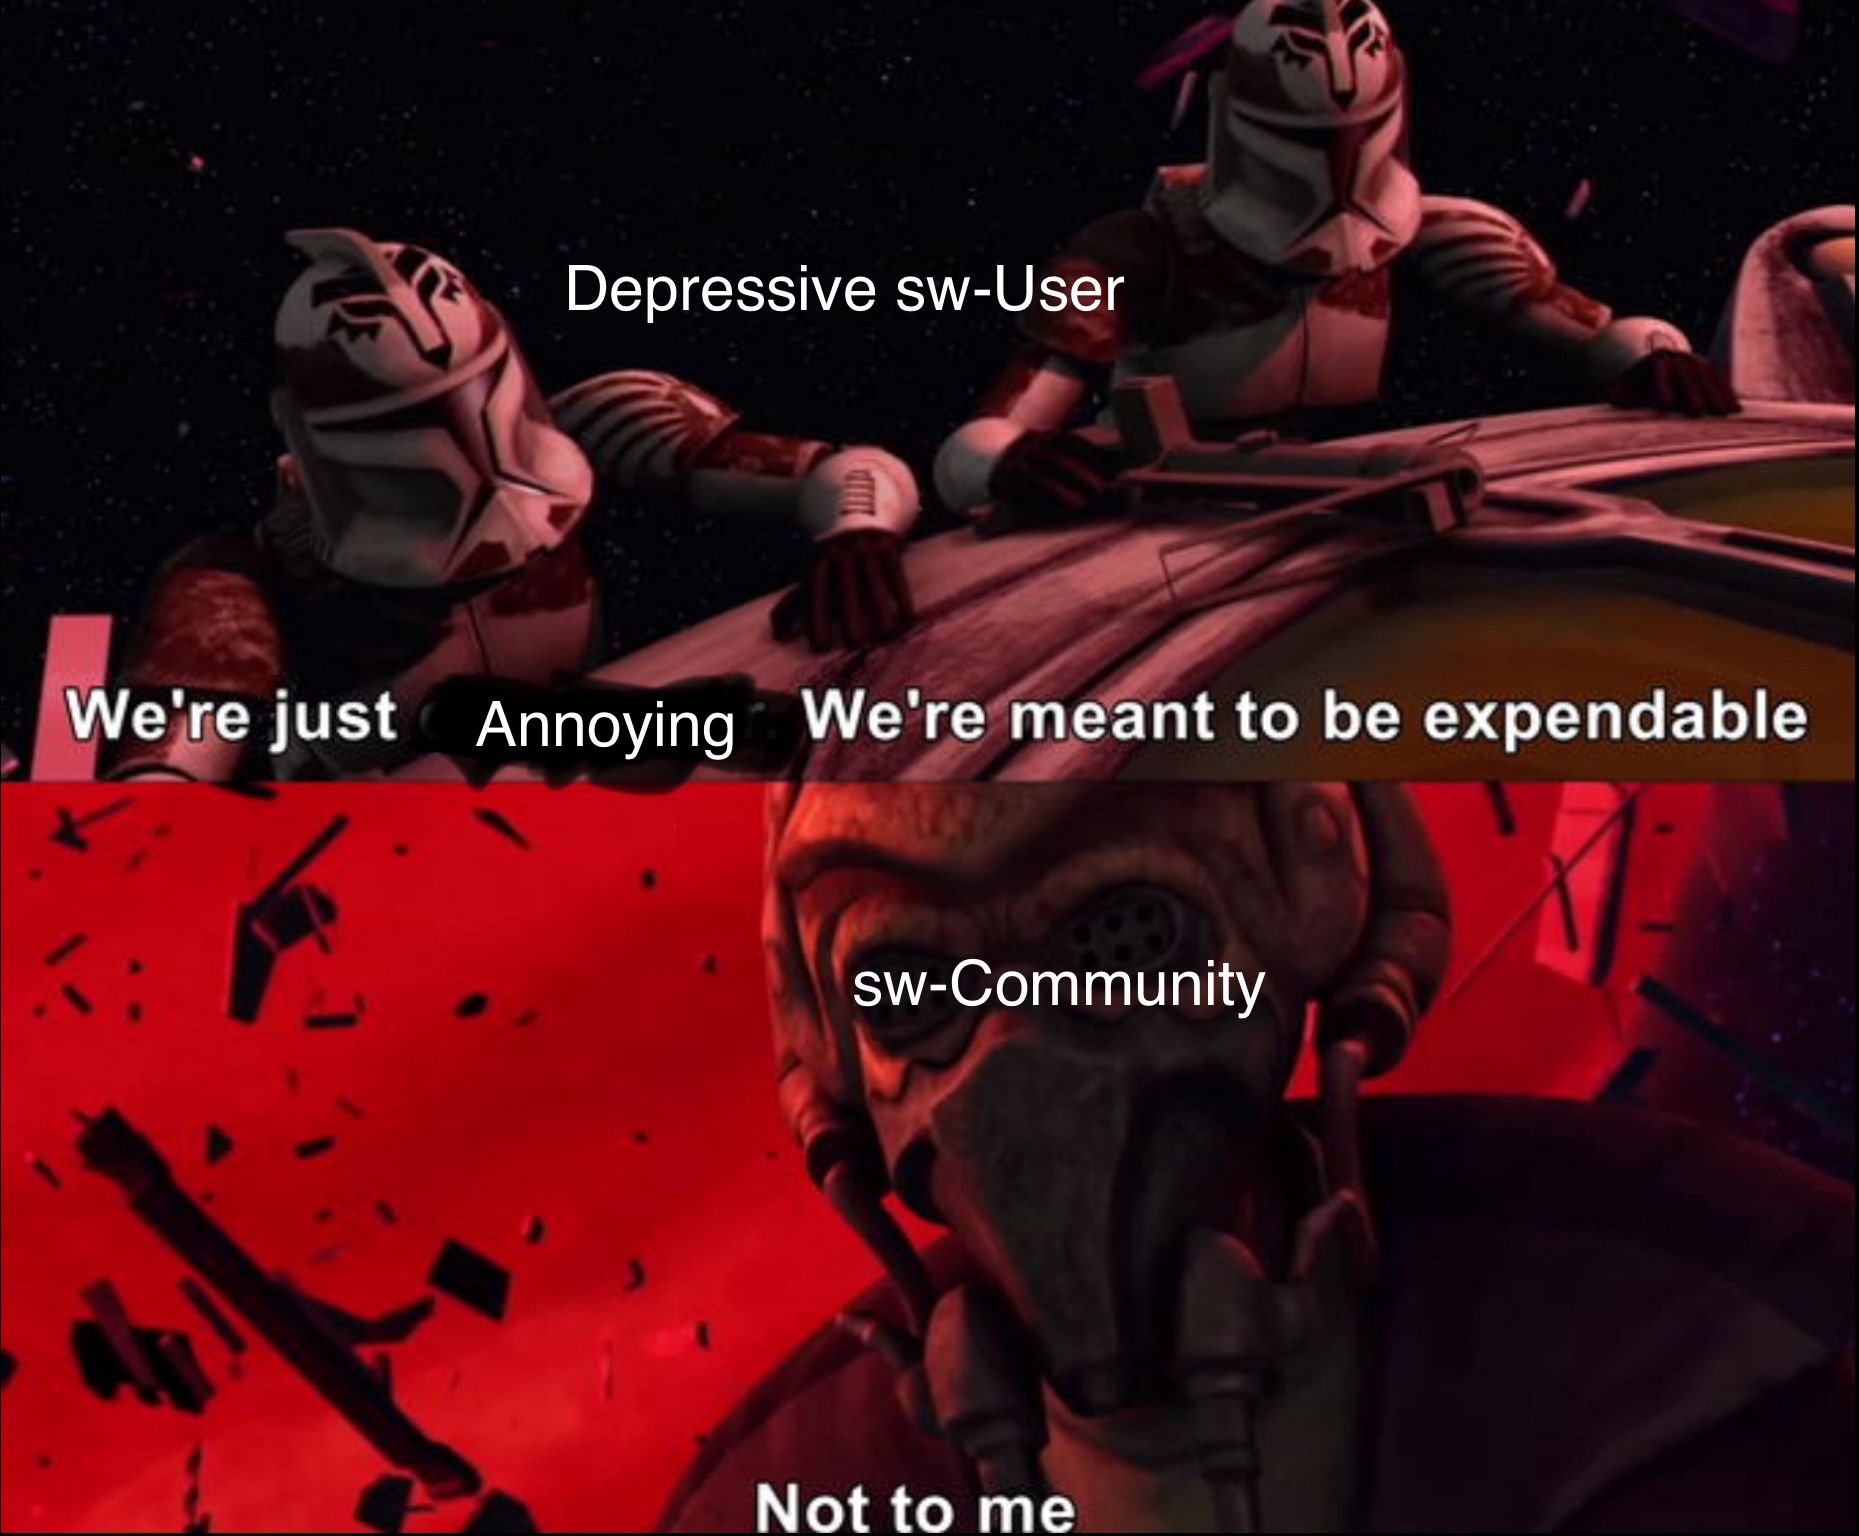 Depressive sw-User
We're just Annoying We're meant to be expendable
sw-Community
Not to me